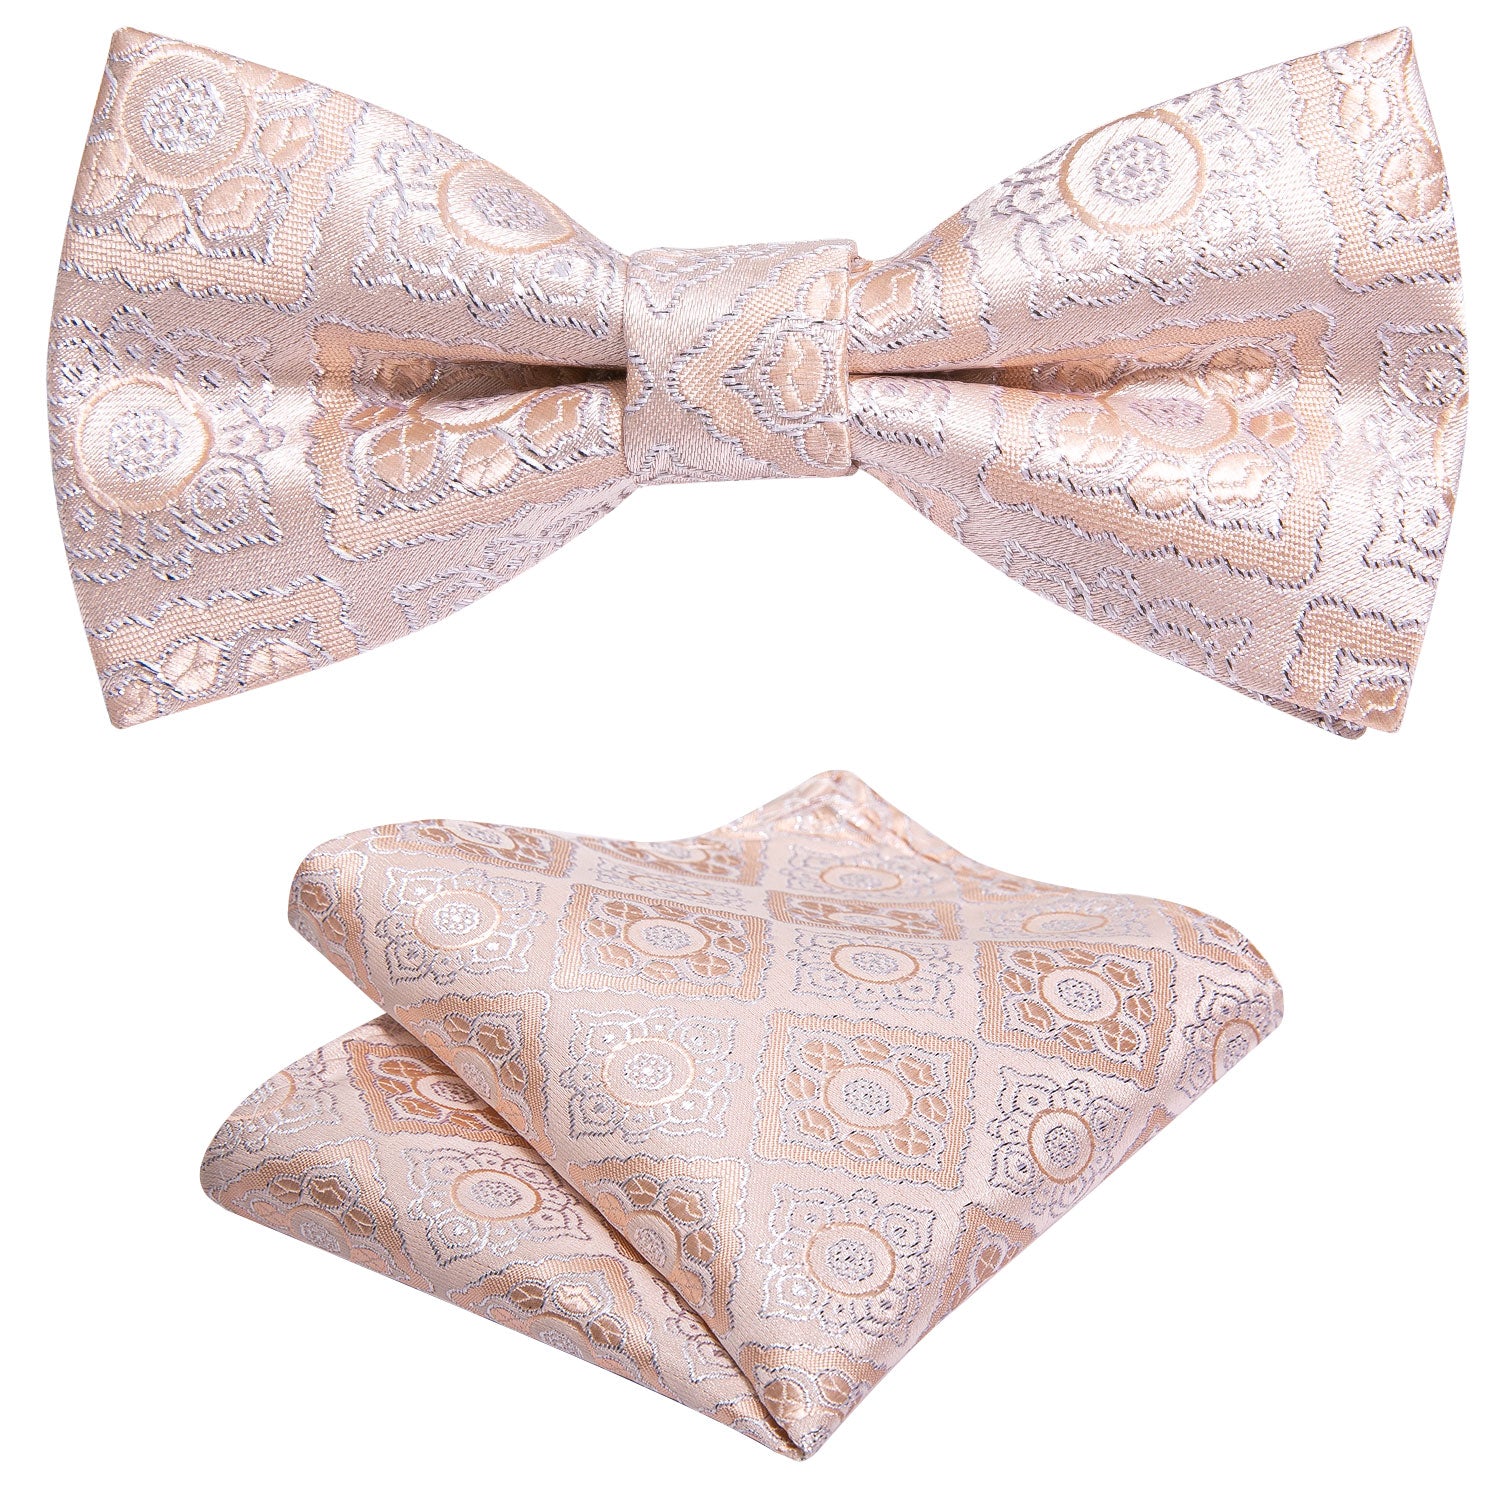 Barry.wang Kids Tie Pink Paisley Silk Children Pre-tied Bow Tie Pocket Square Set